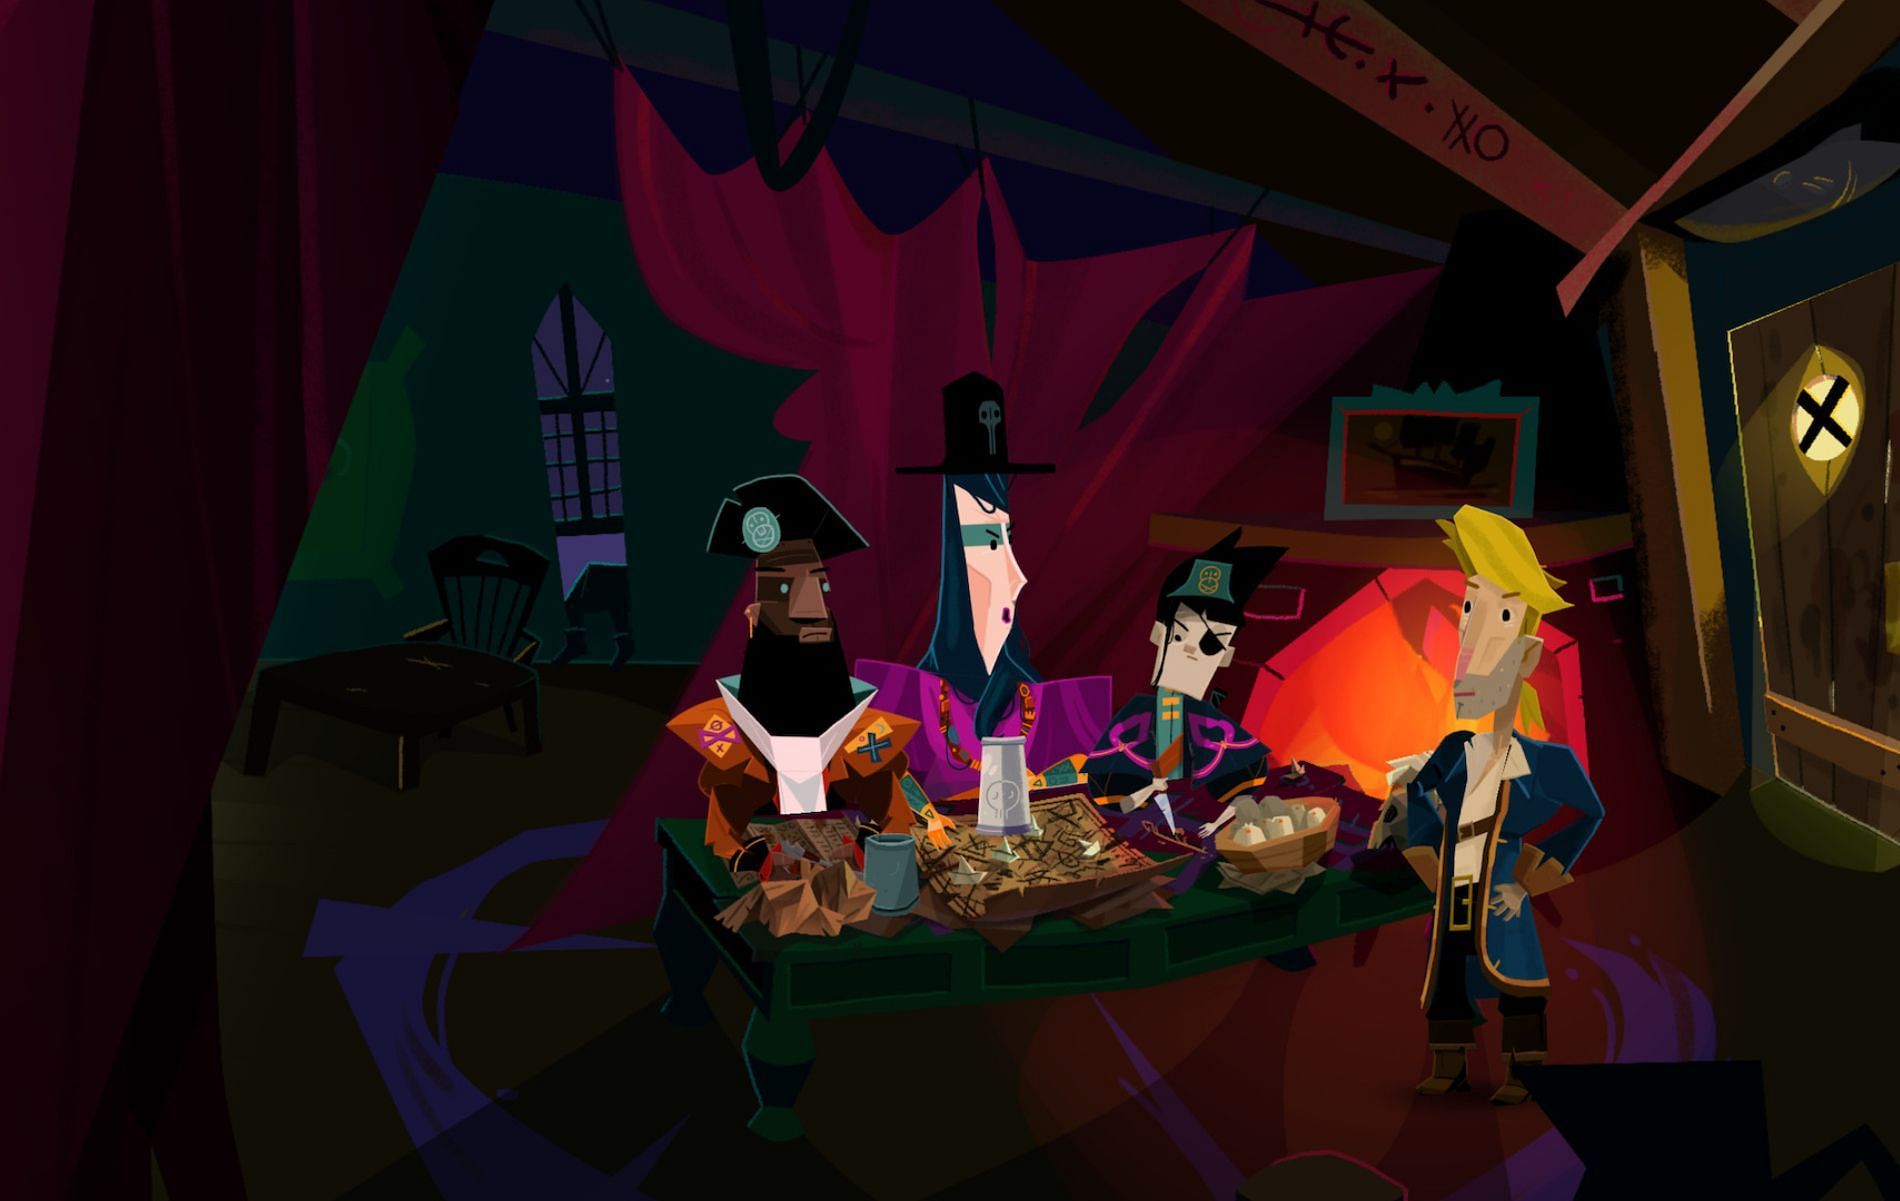 Obtaining the Eyepatch to create a successful disguise in Return to Monkey Island (image via Return to Monkery Island)